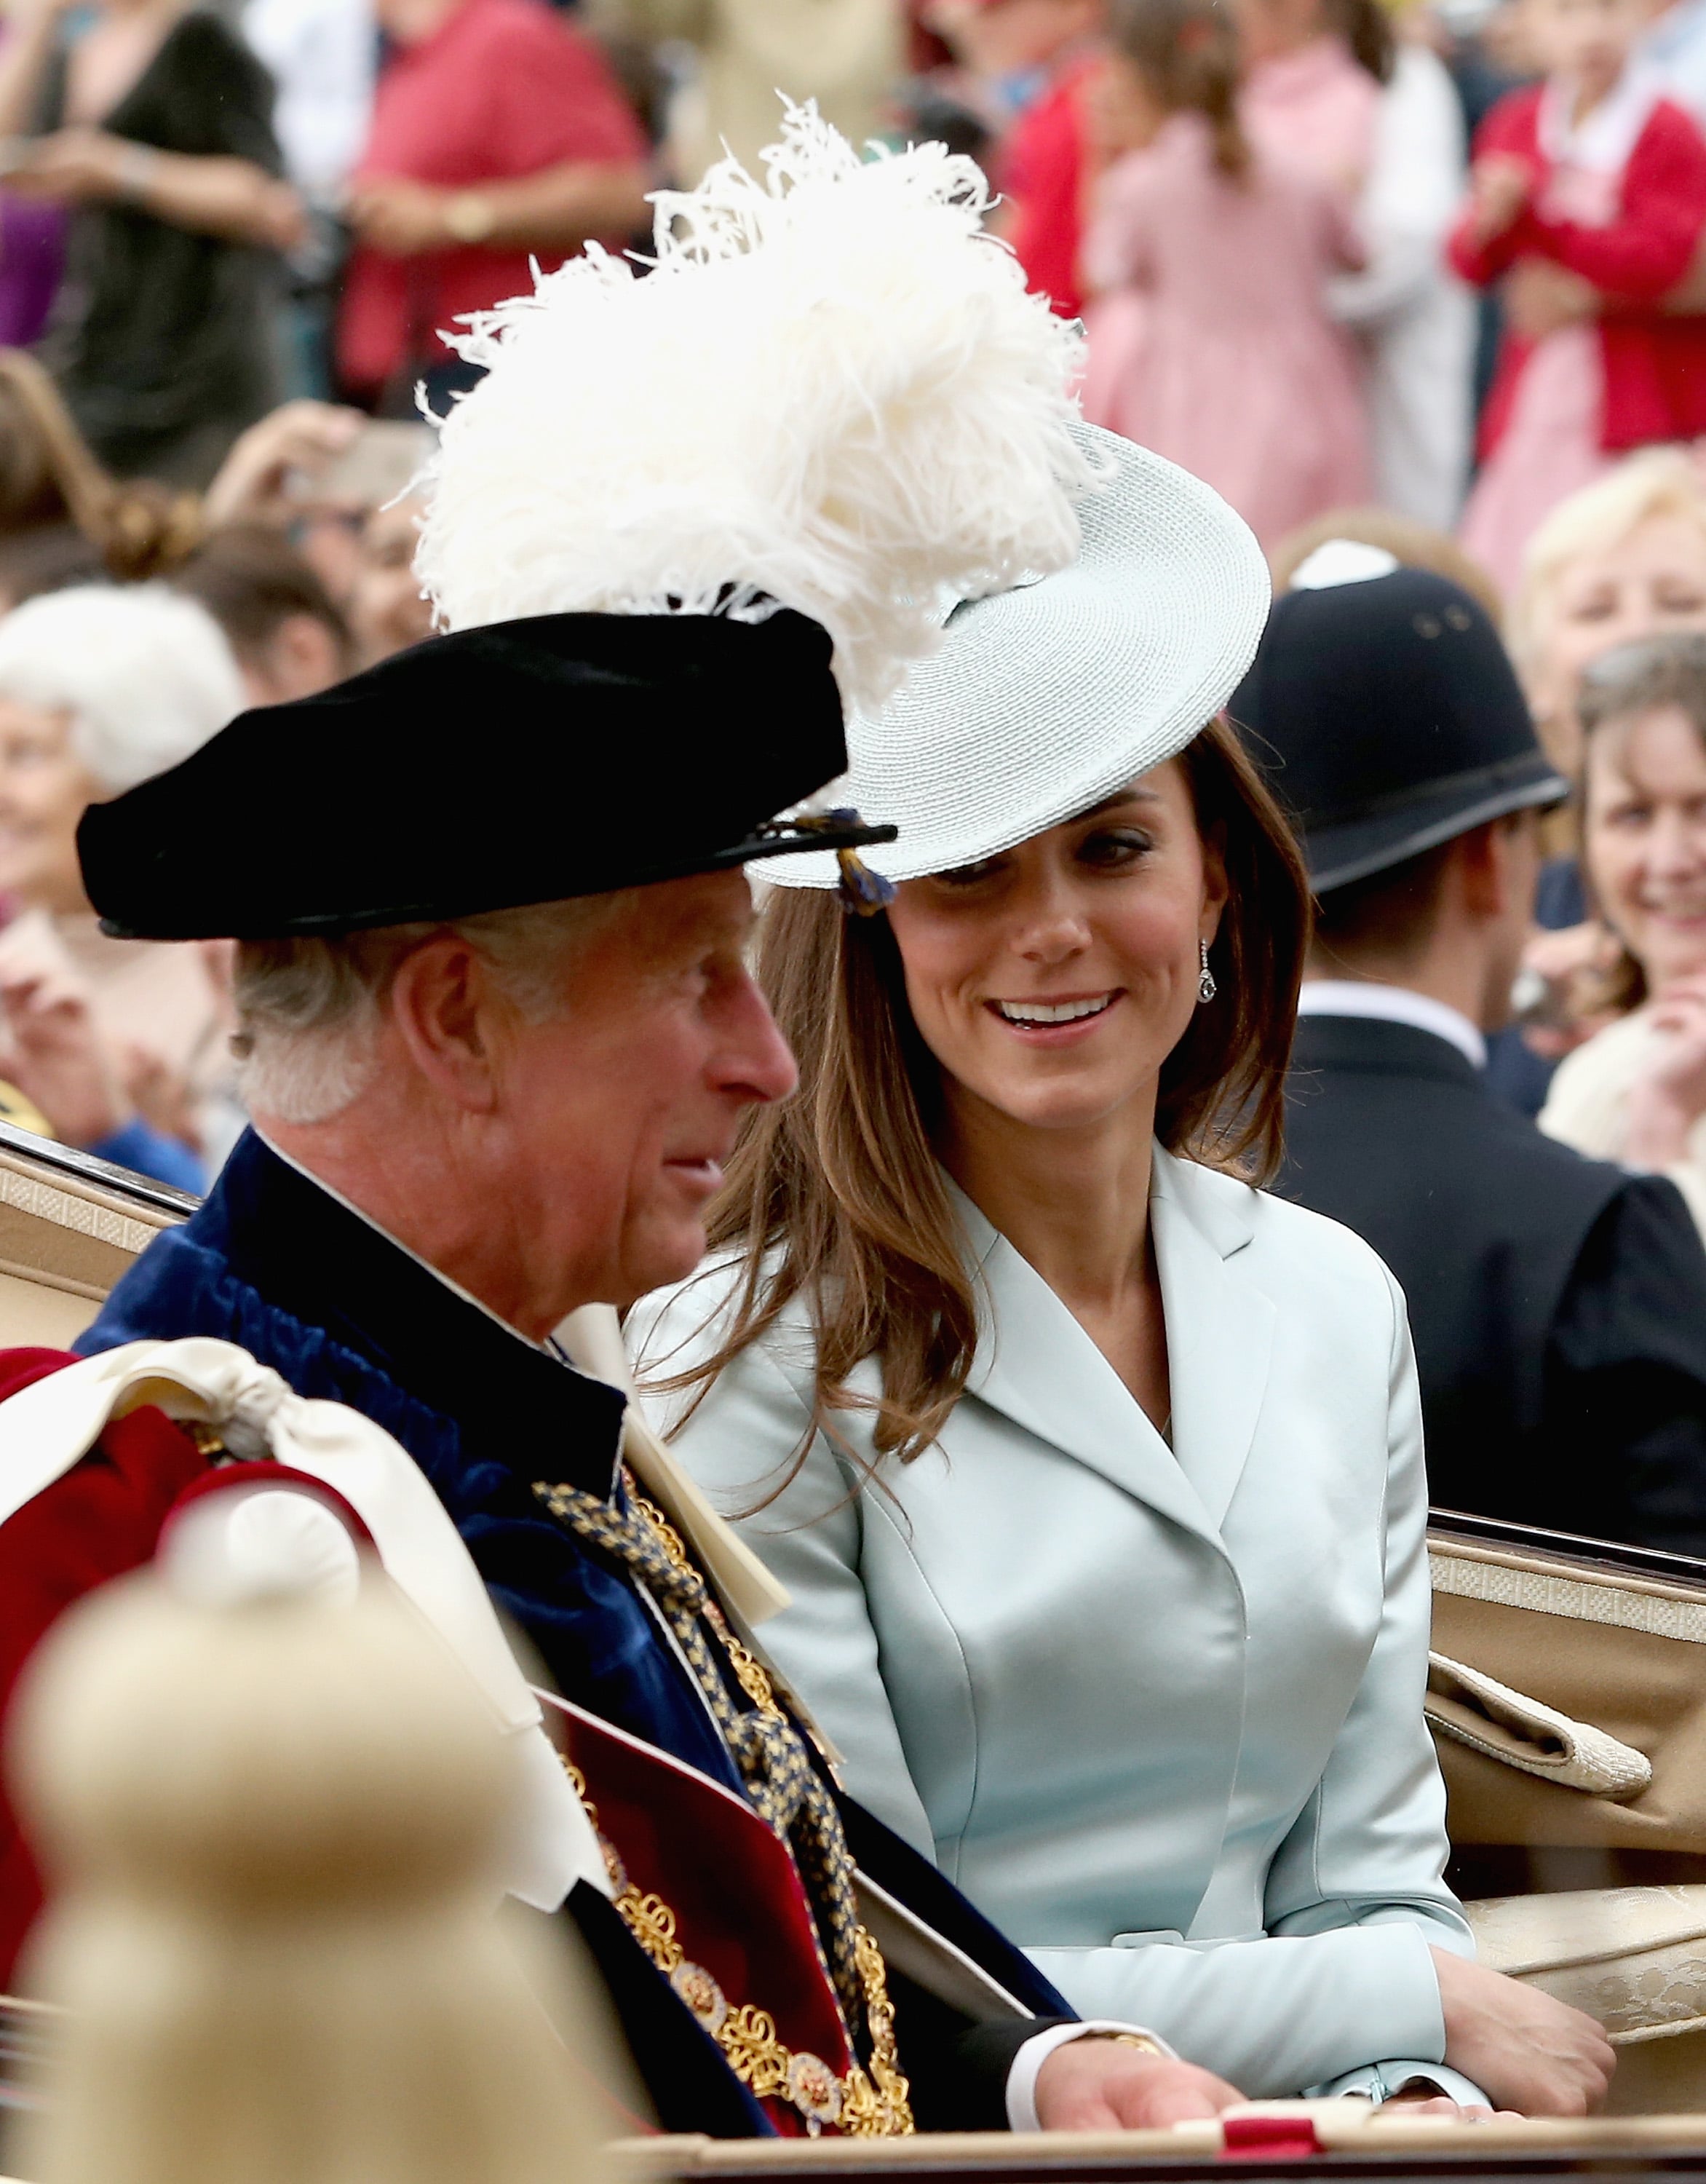 Kate Middleton Order of the Garter Service outfit: Recreate the